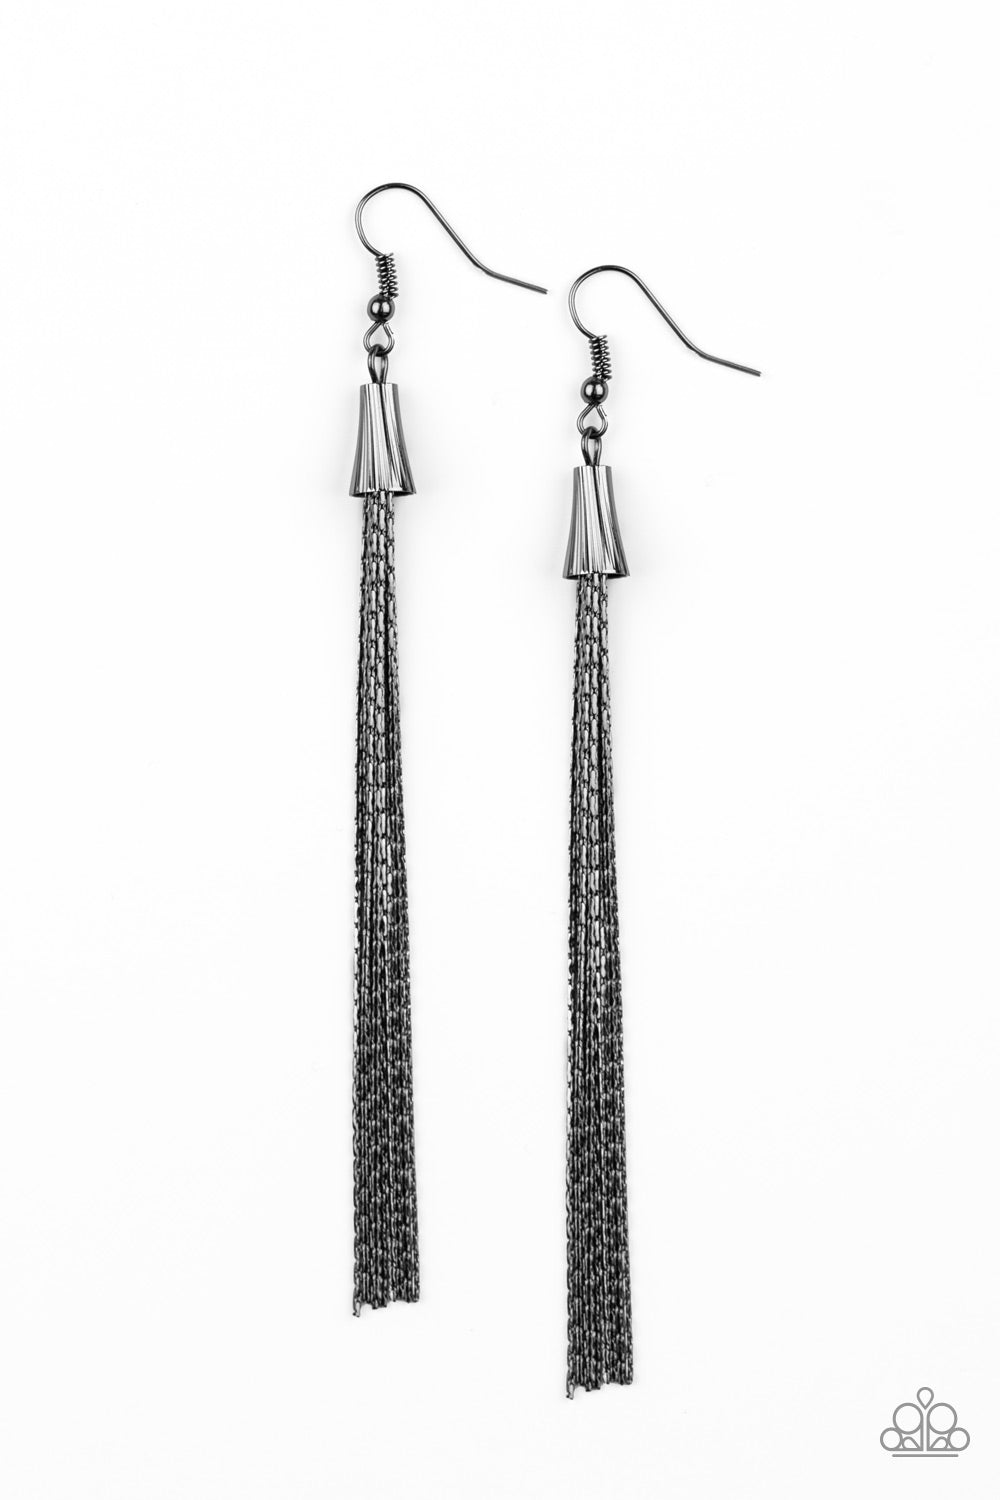 Shimmery Streamers - Black/Gunmetal Earrings (July 2020 Life of the Party)